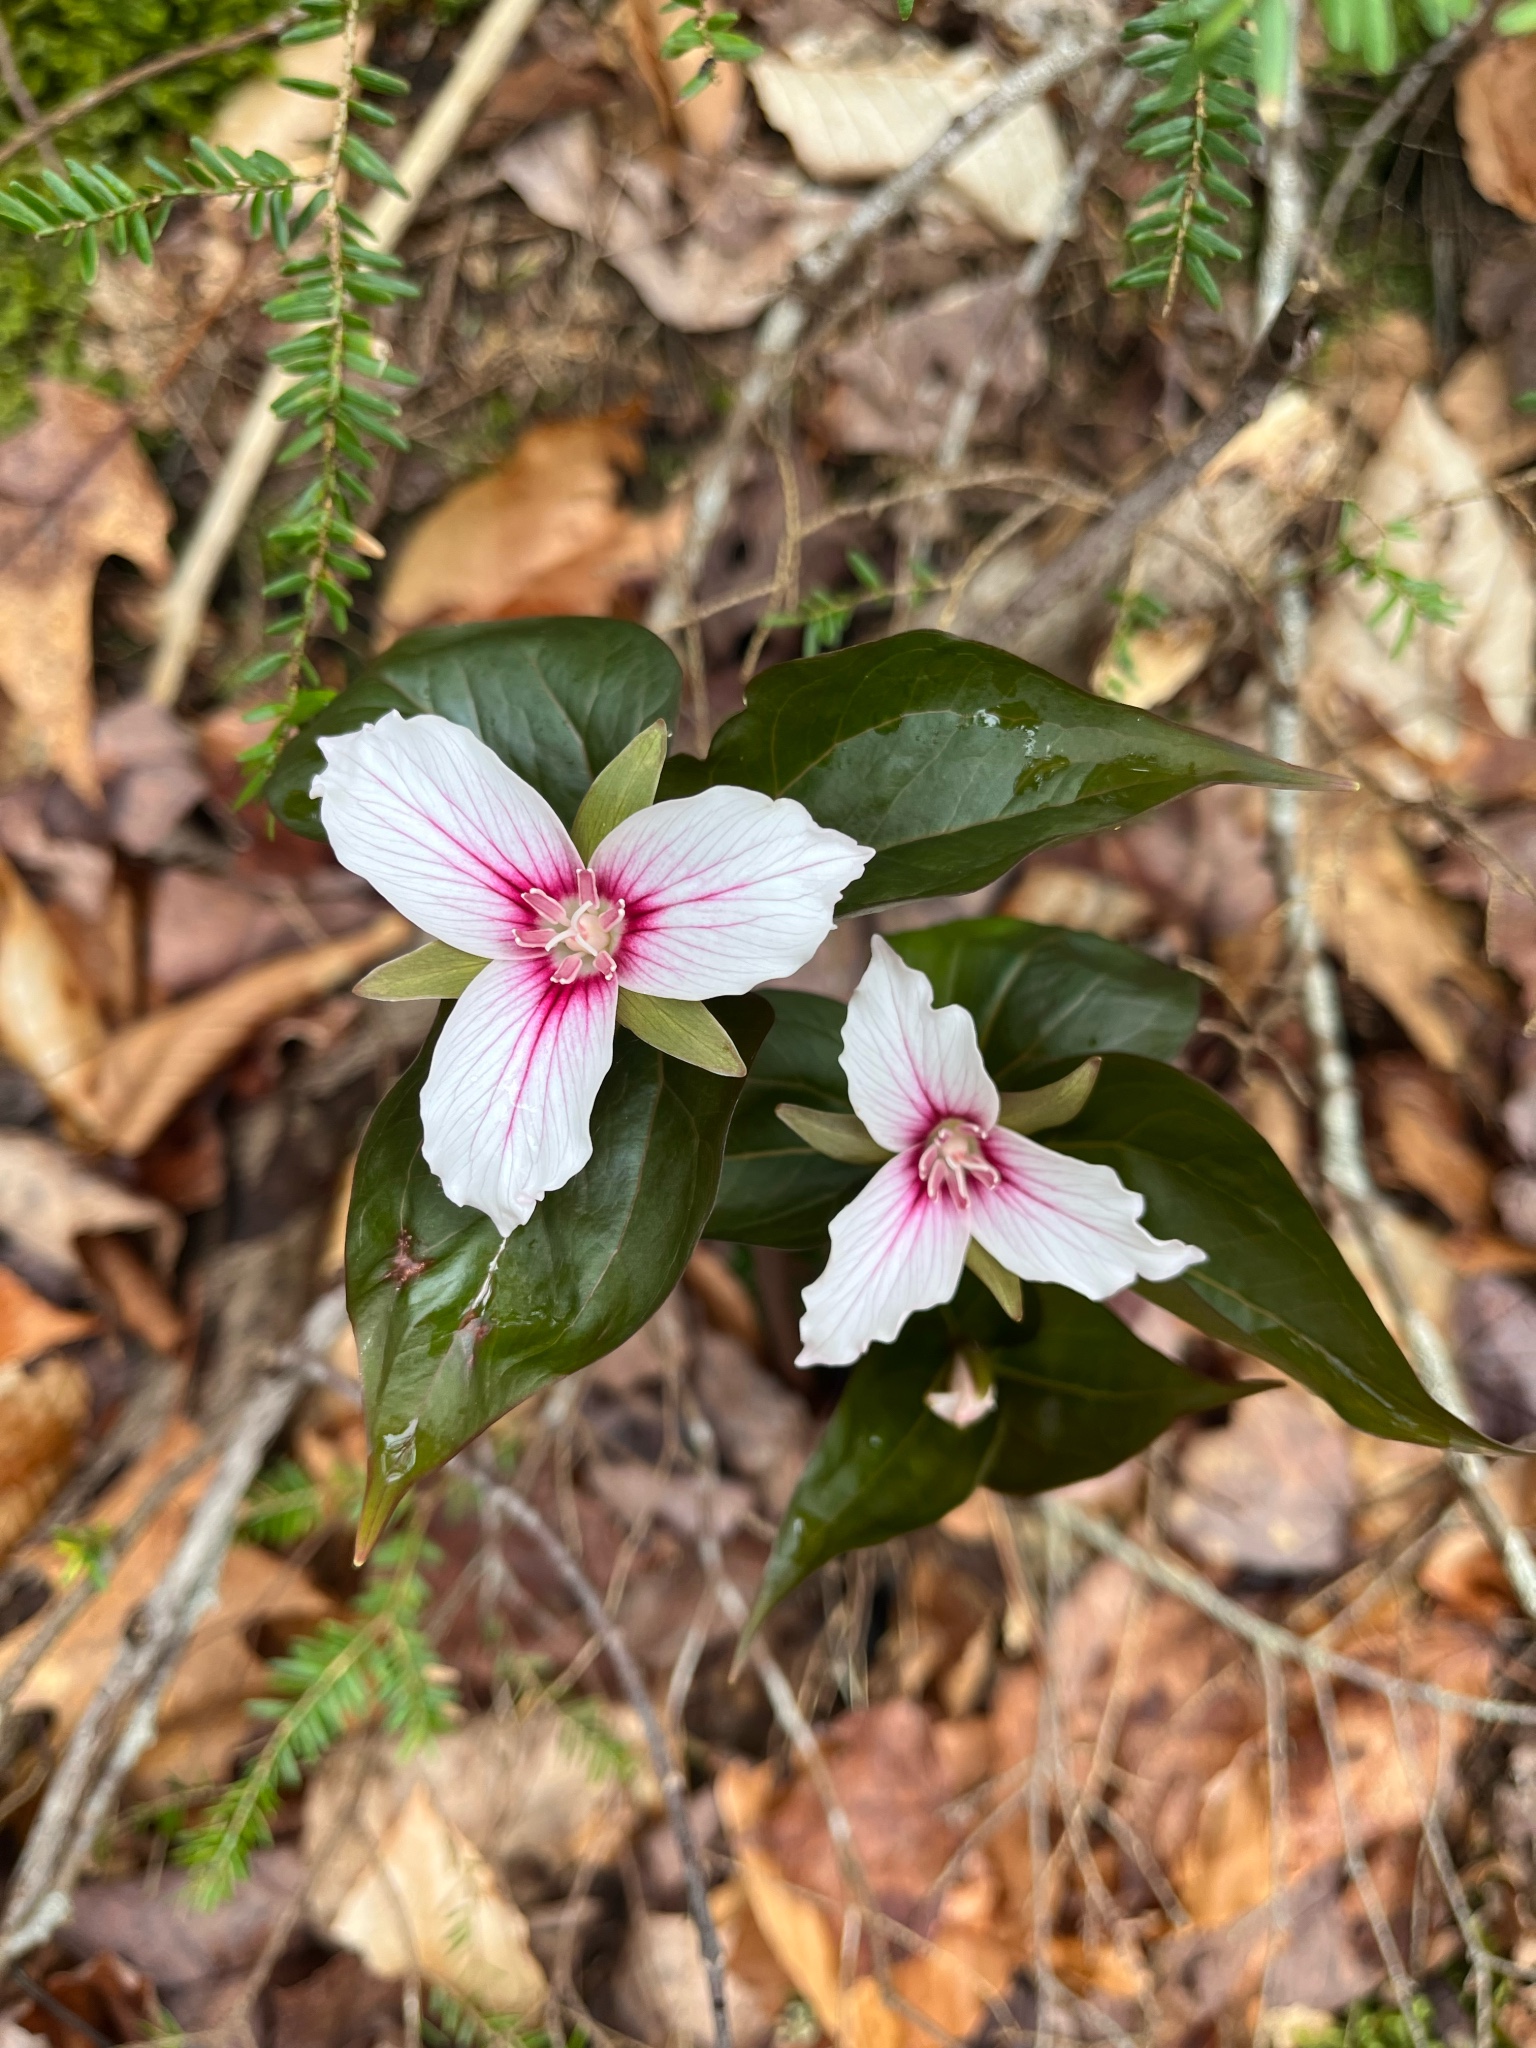 Two white and pink flowers from above.